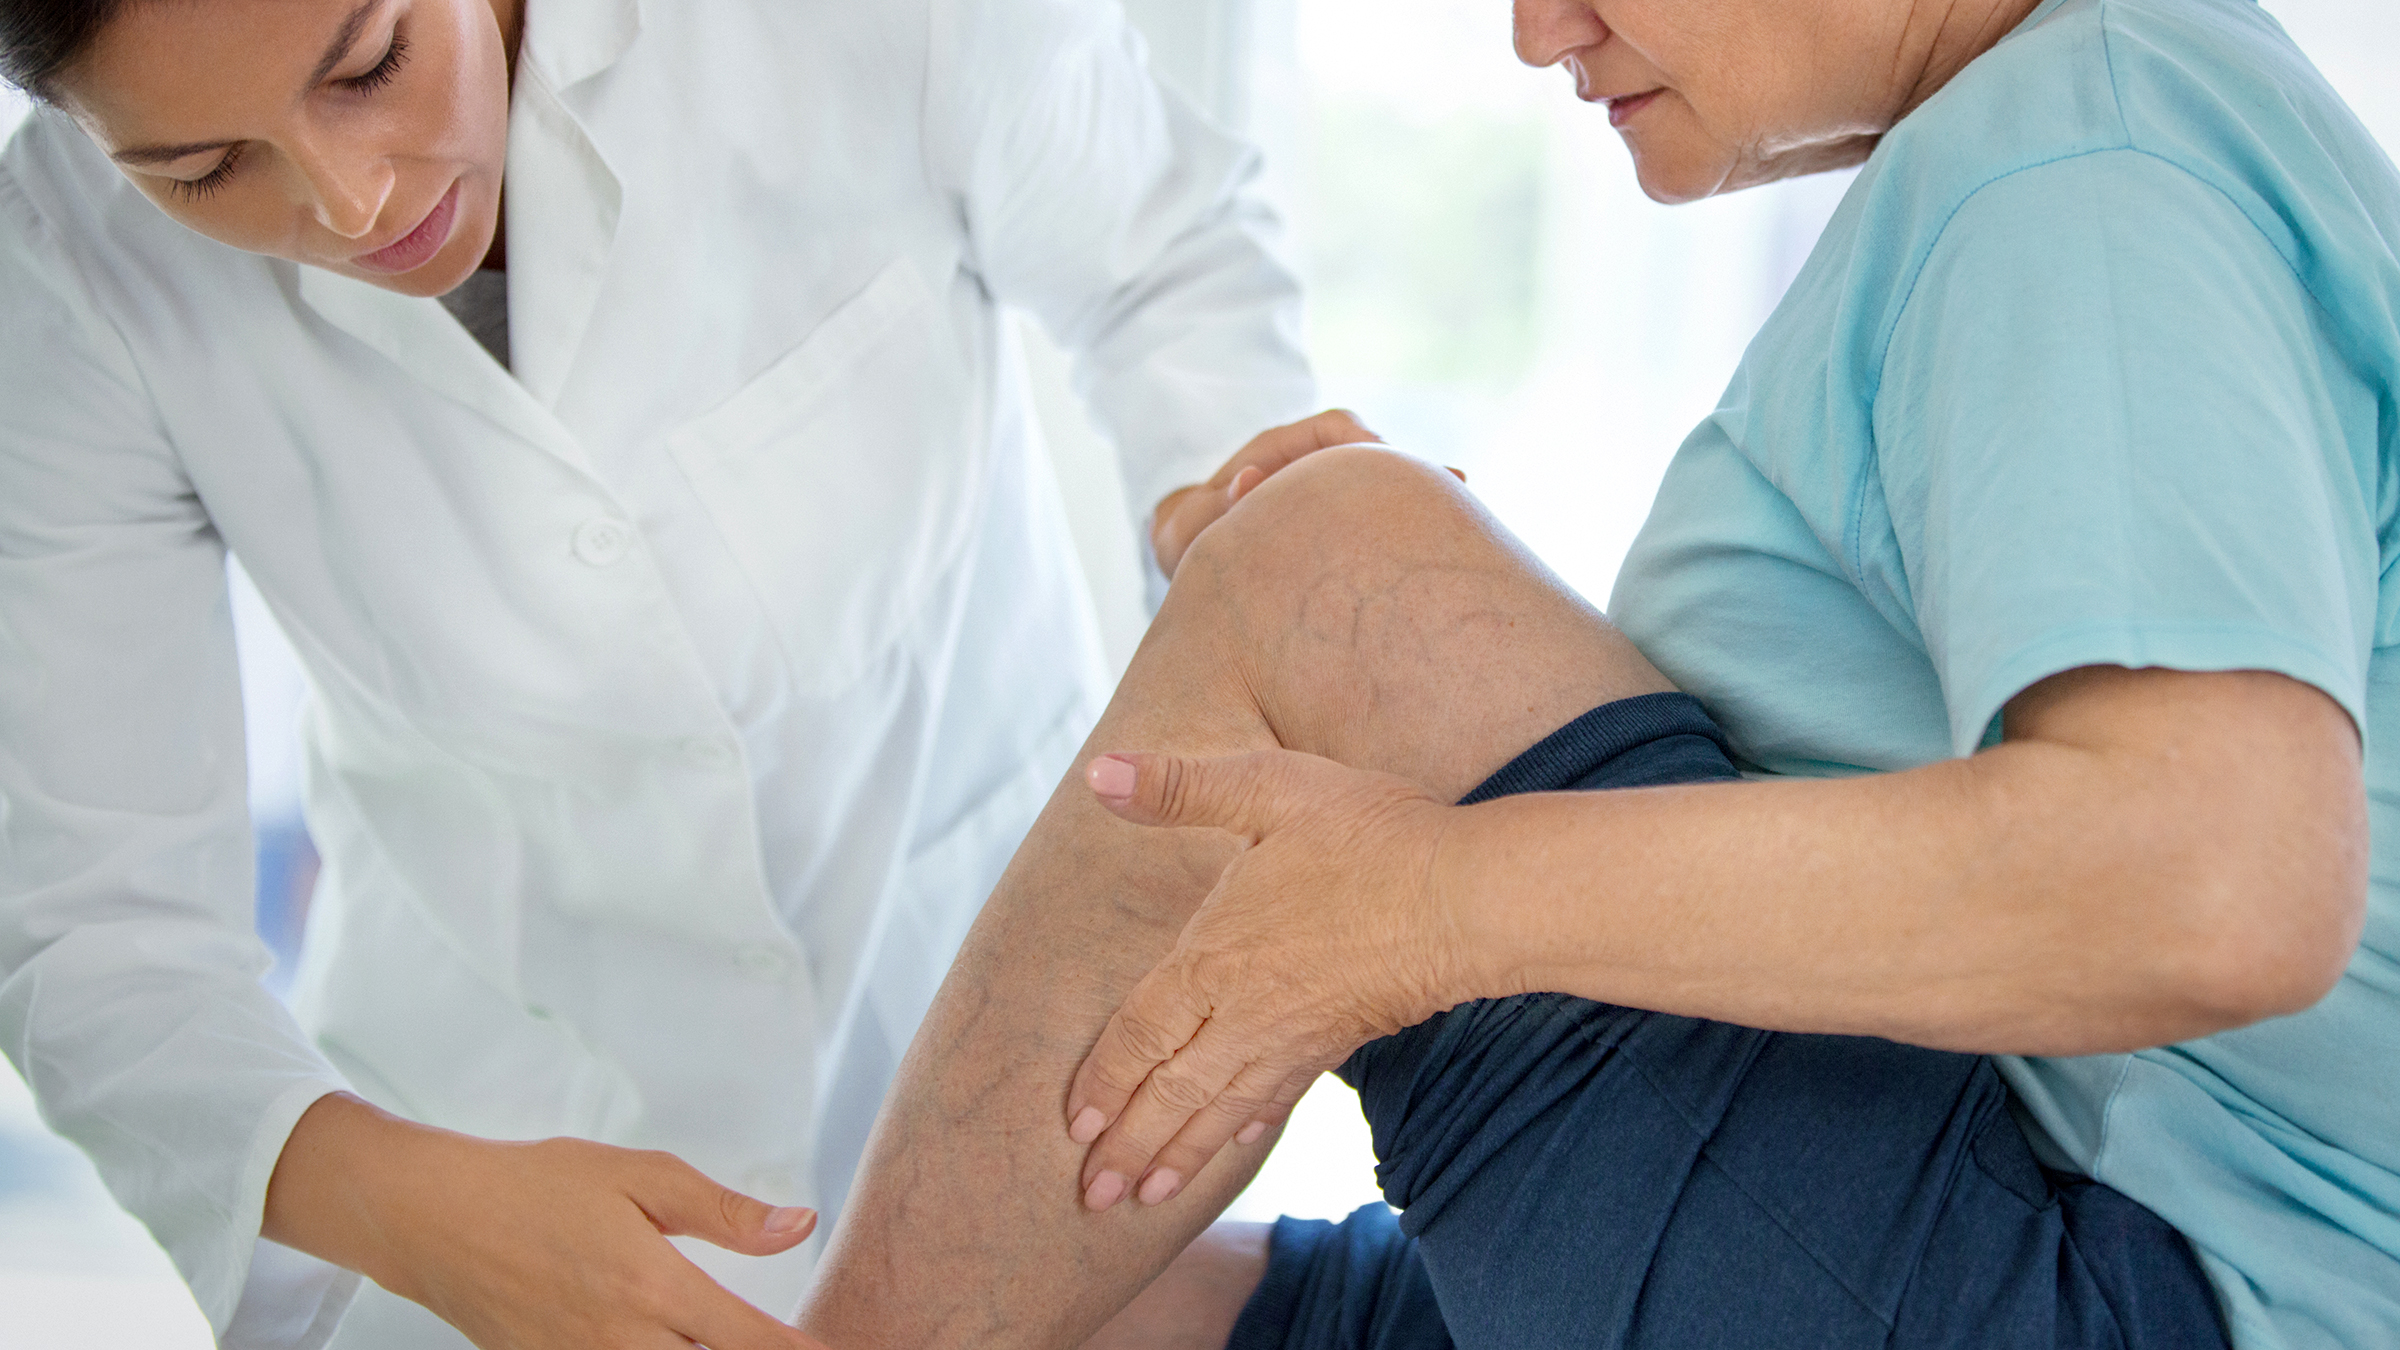 How Much Do Varicose Vein Treatments Cost? - GoodRx